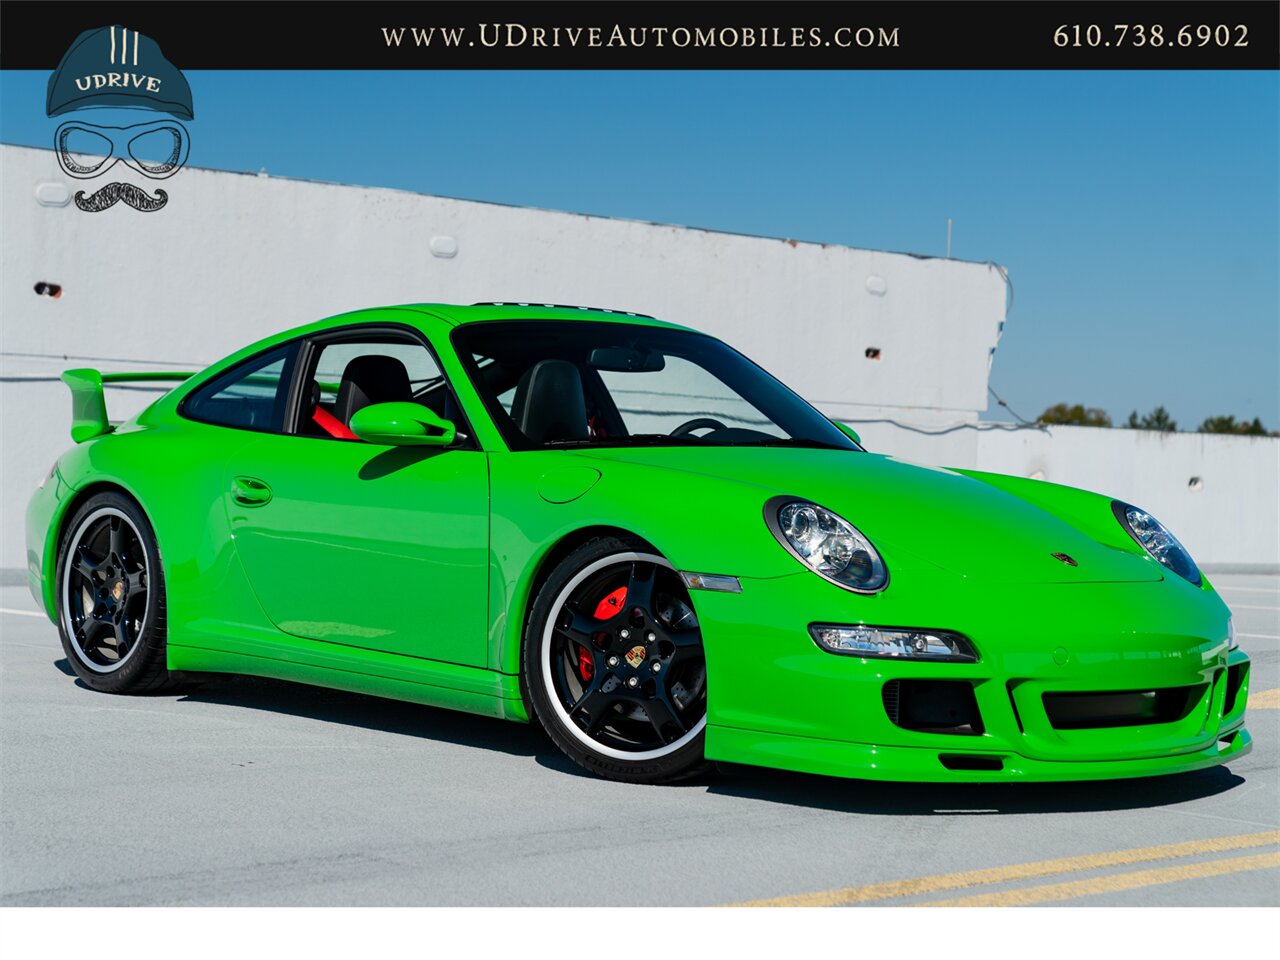 2006 Porsche 911 Carrera 4S  997 PTS Signal Green 6Sp Sport Sts Spt Chrono Spt Exhst - Photo 4 - West Chester, PA 19382